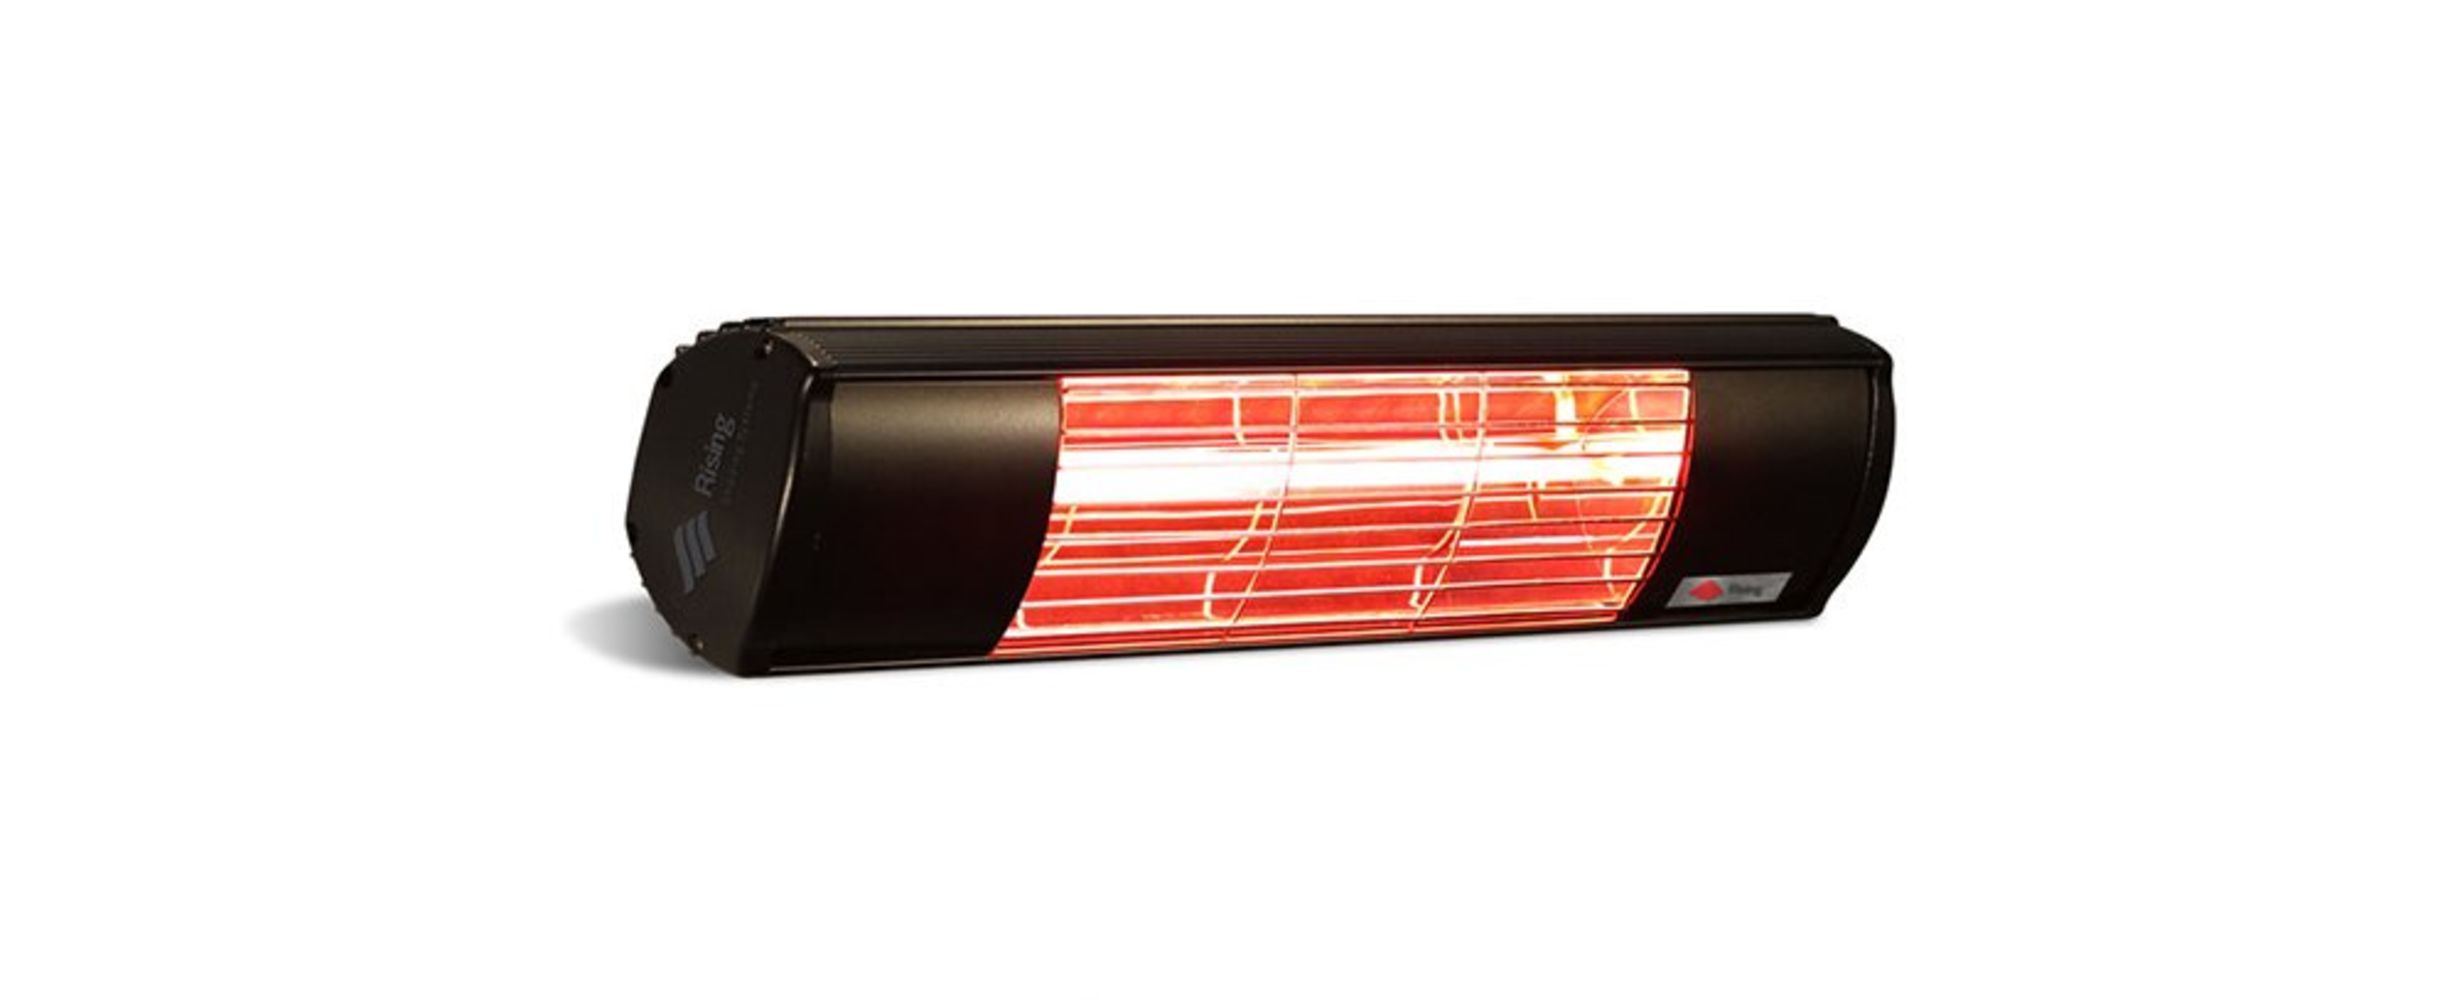 10% buyers premium on New High Quality Infrared Commercial Outdoor/Indoor Heaters